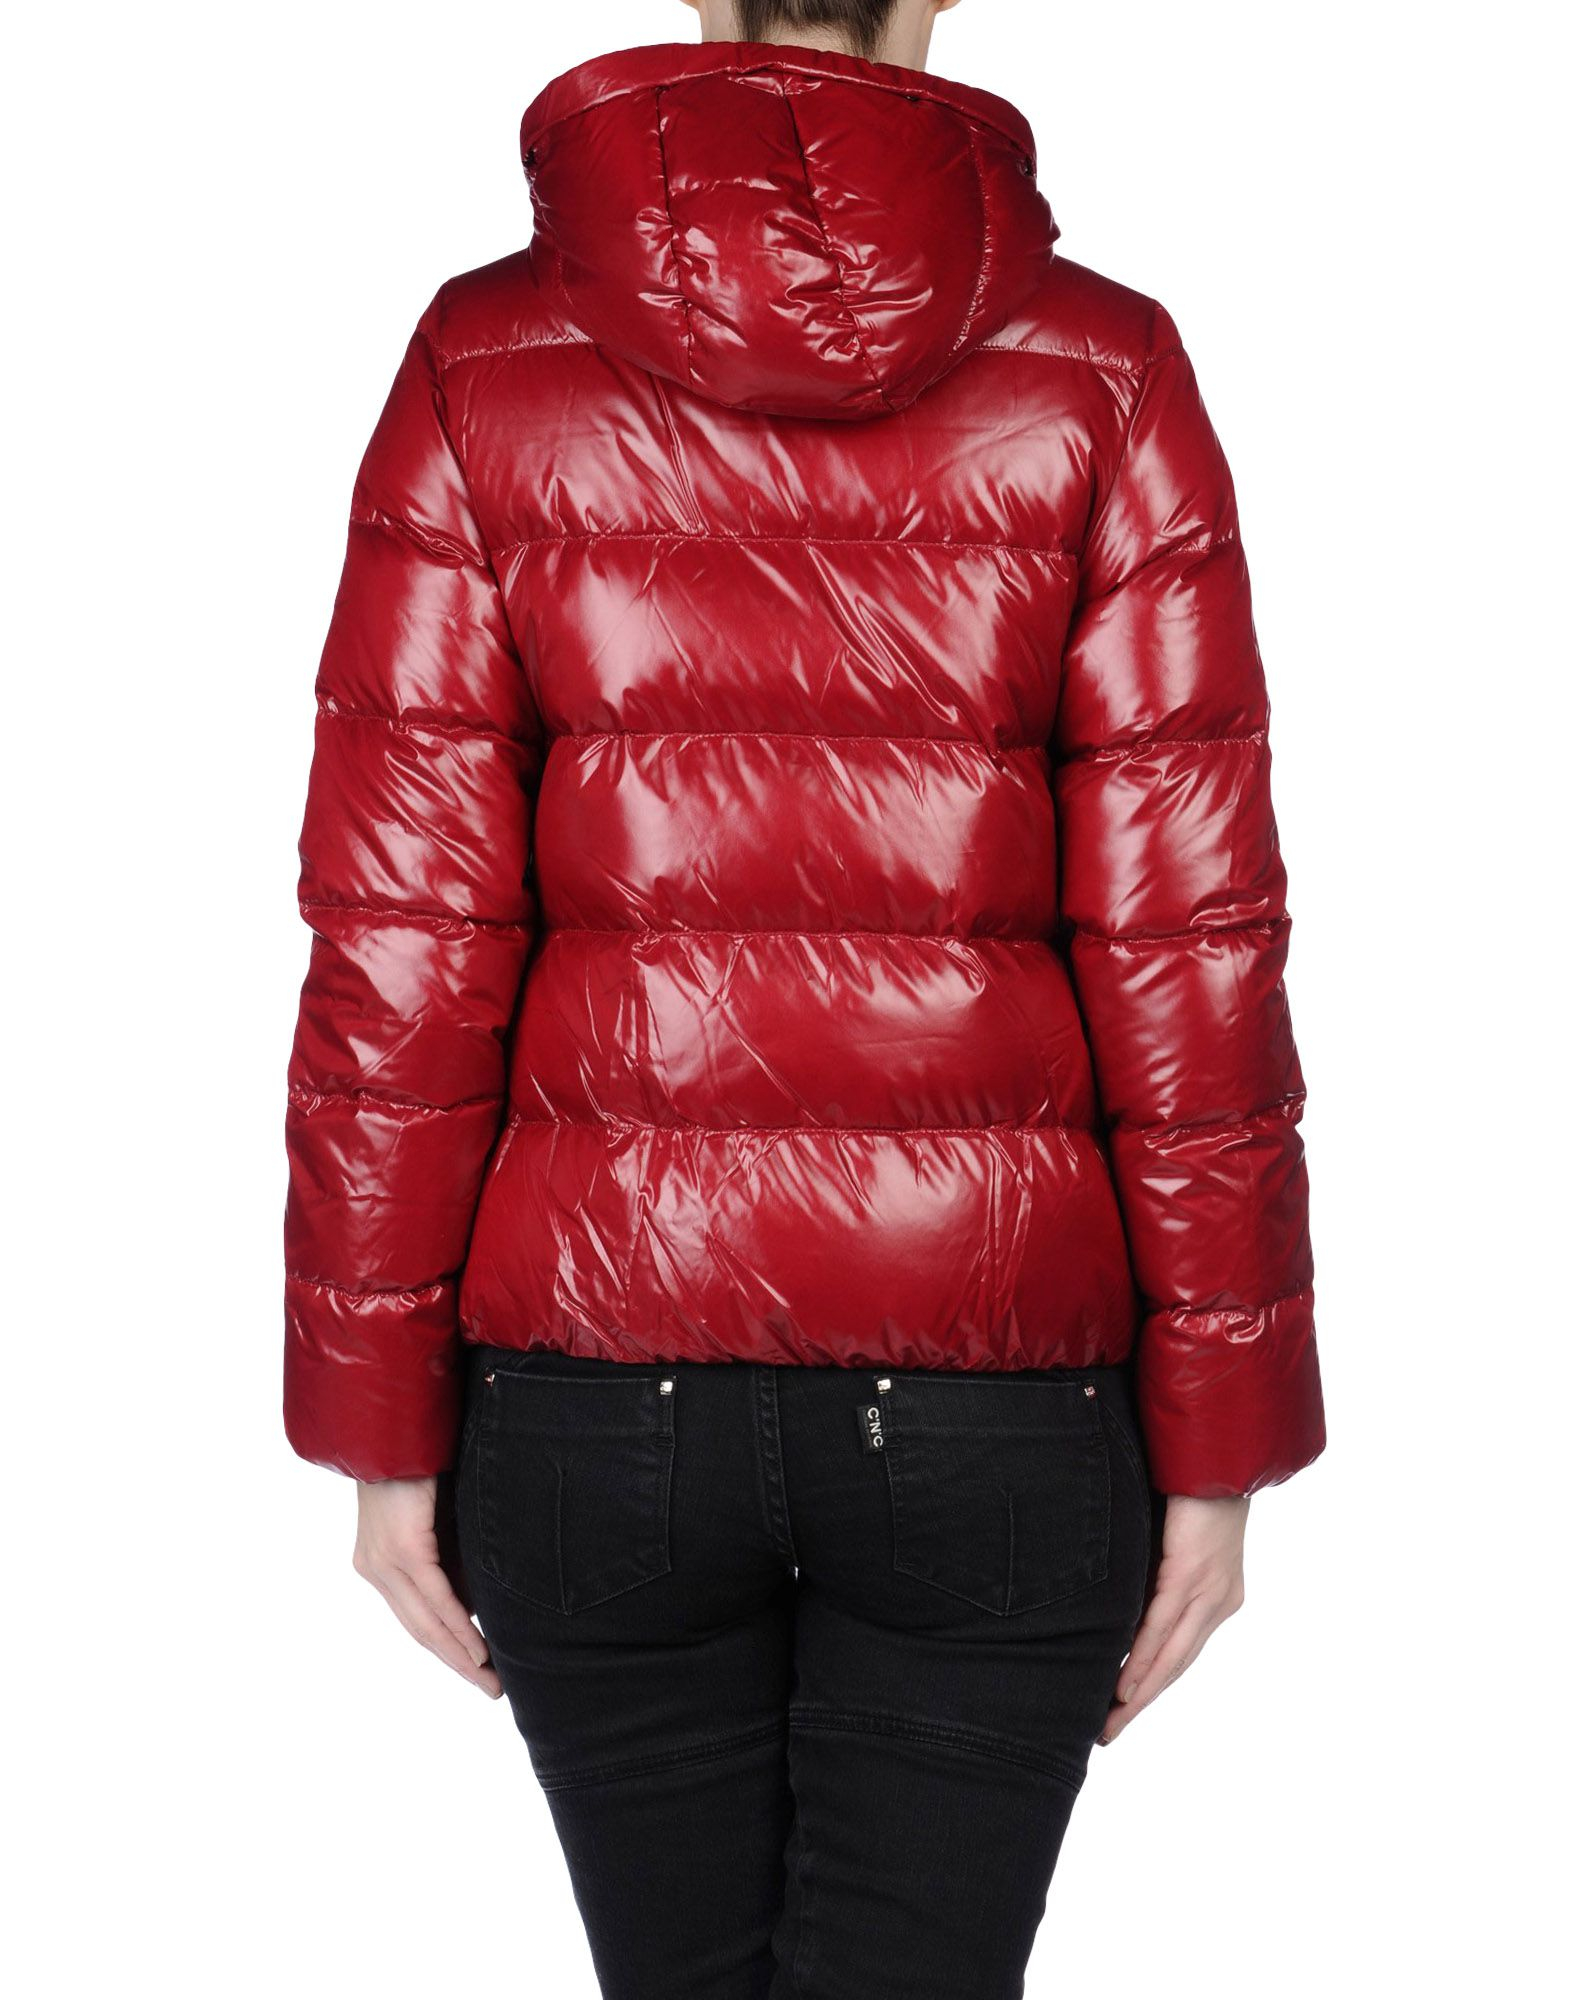 Lyst - Duvetica Down Jacket in Red - Save 64%